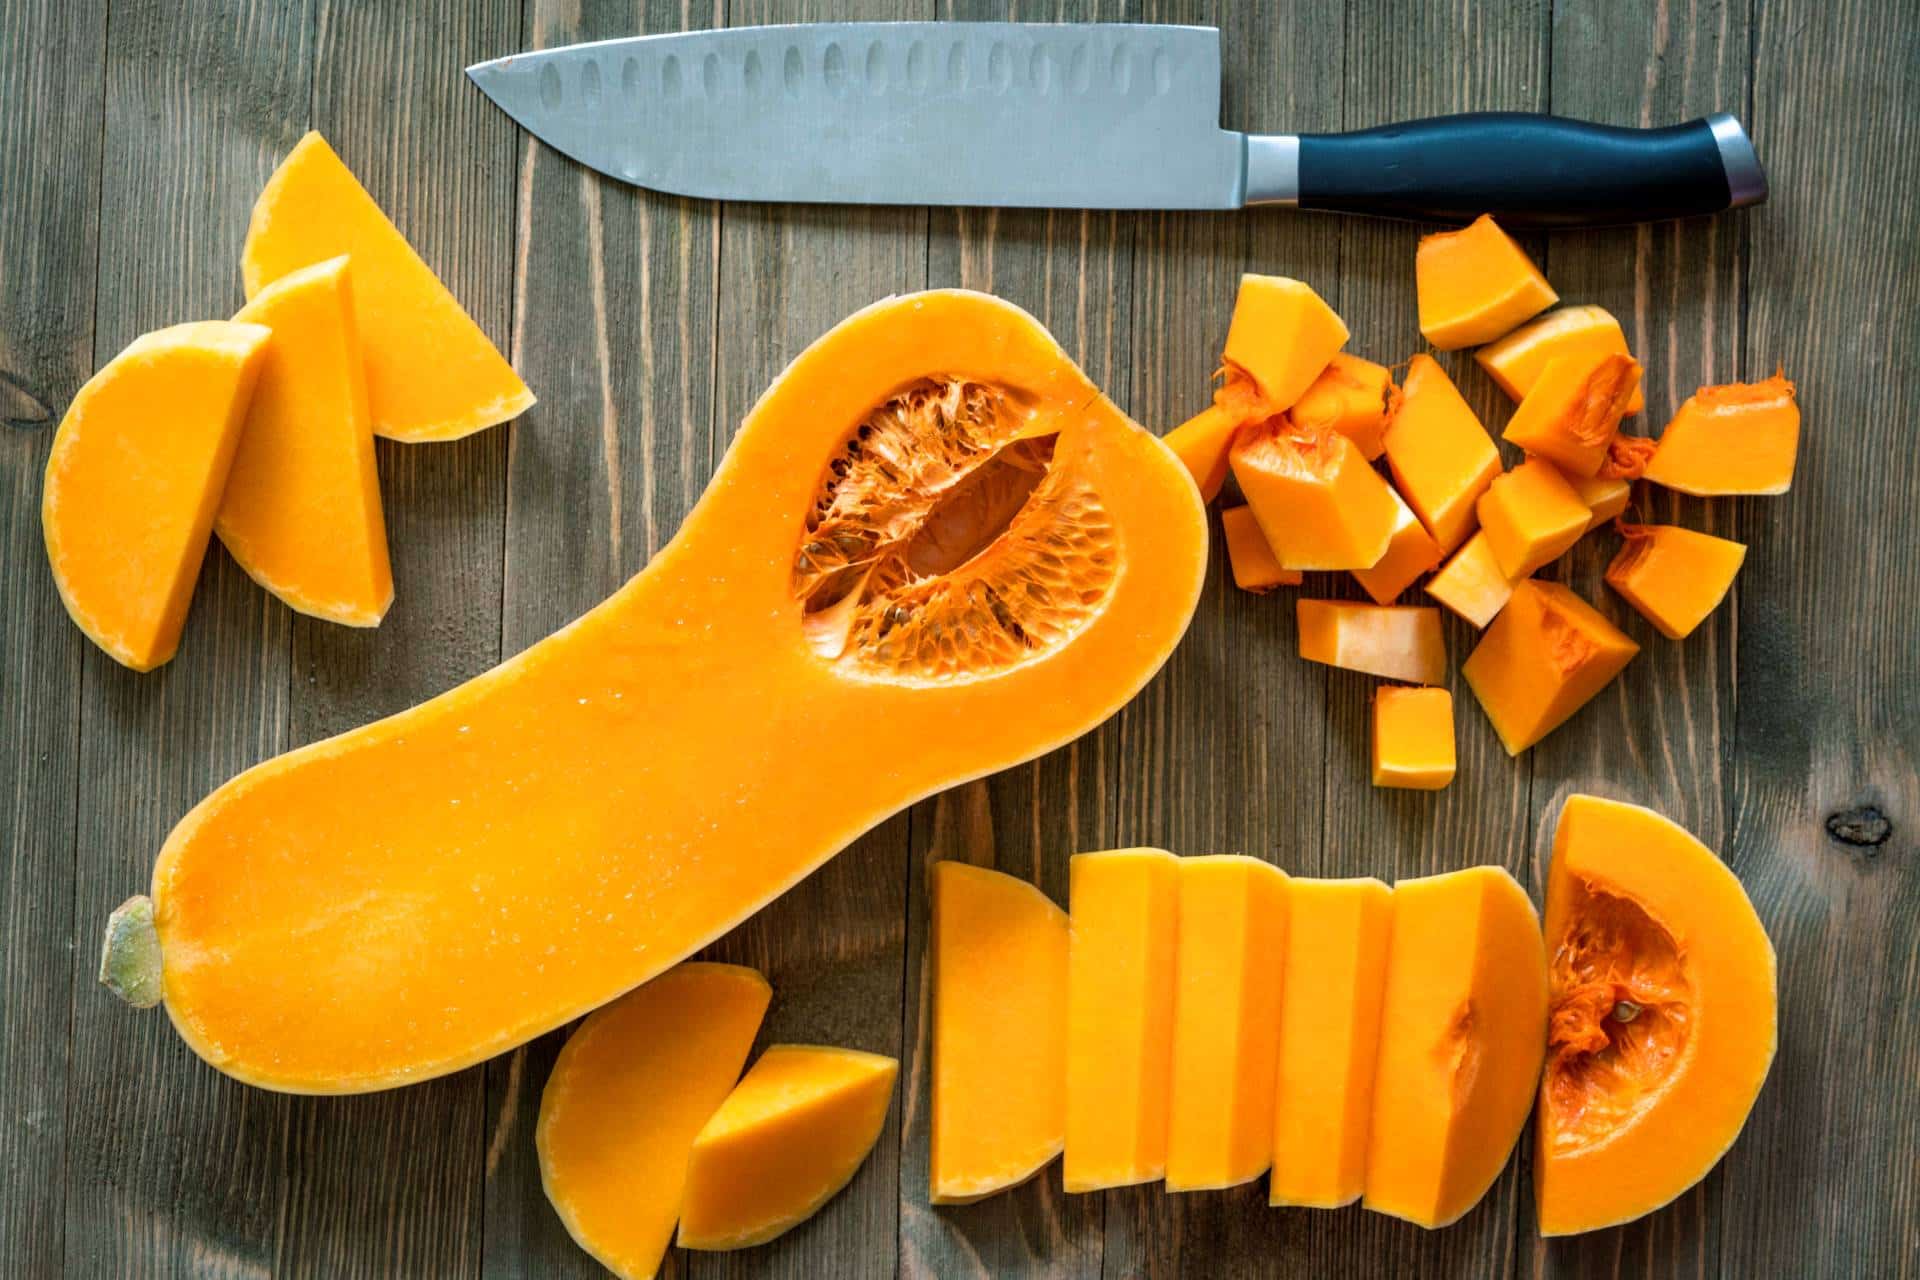 How To Pick, Cut and Cook Butternut Squash (+7 Recipes To Try)